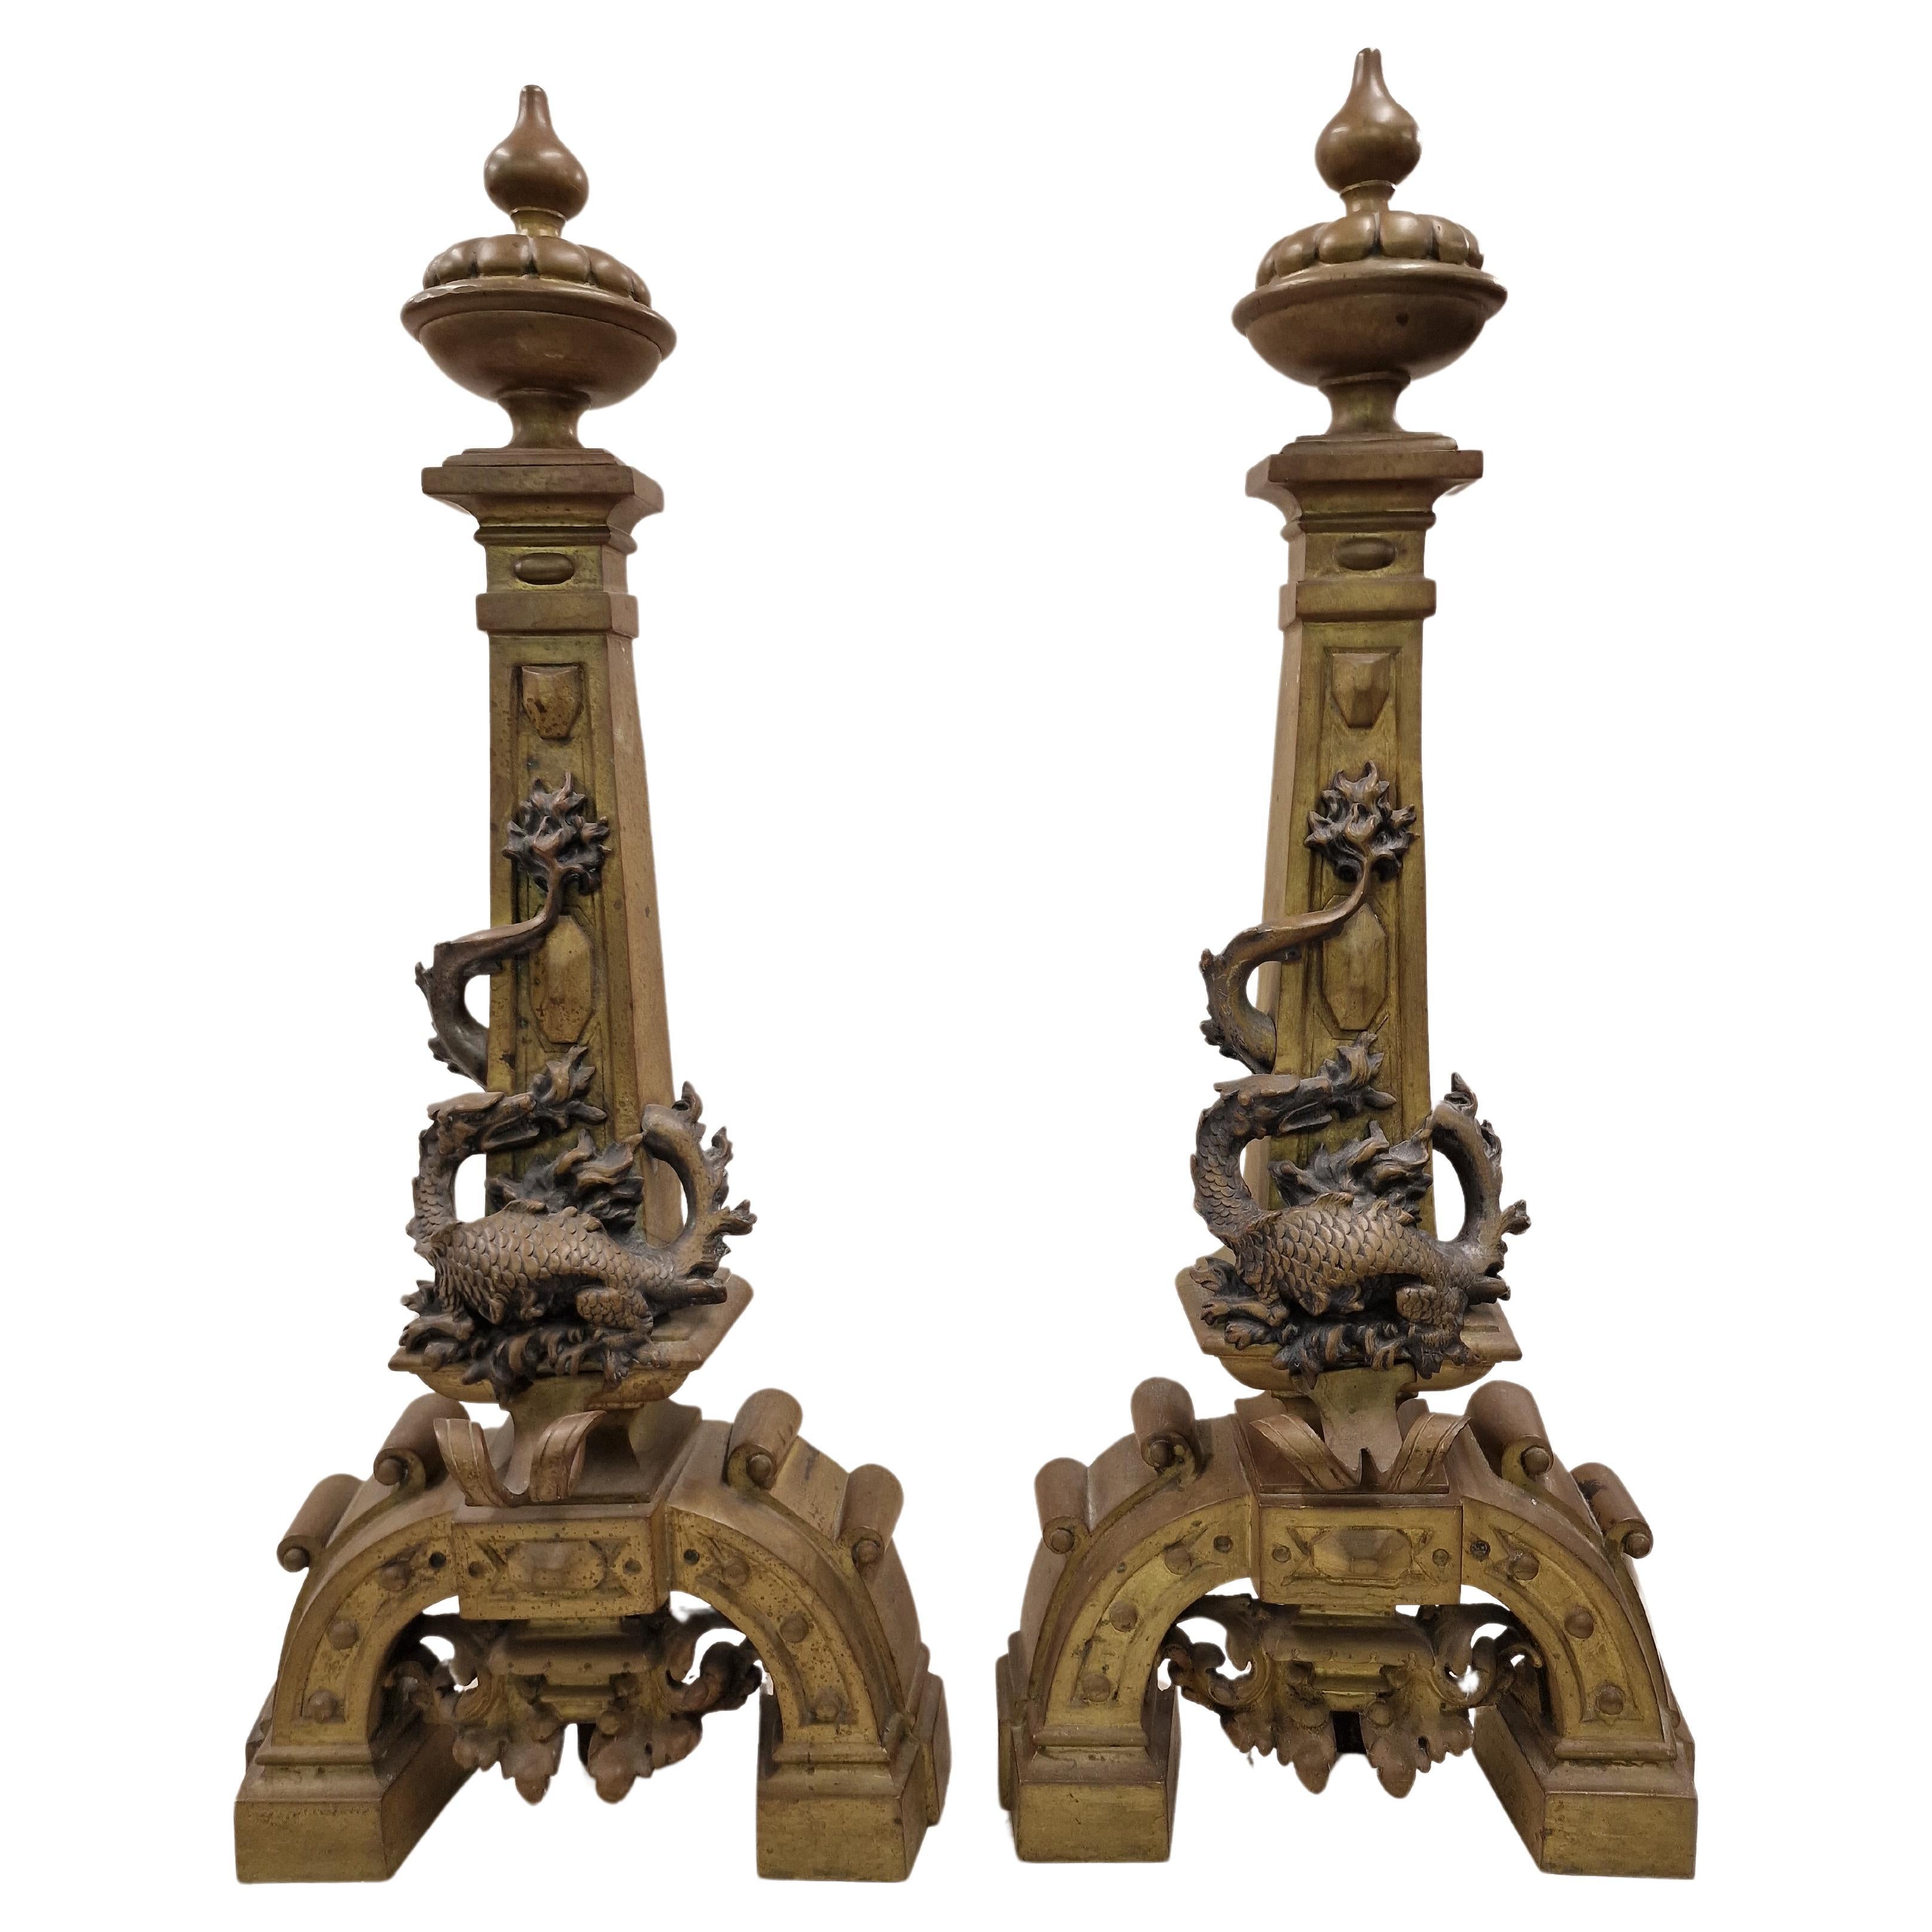 Magnificent fireplace display presenter, chimney, heating, dragons, 1880 Italy